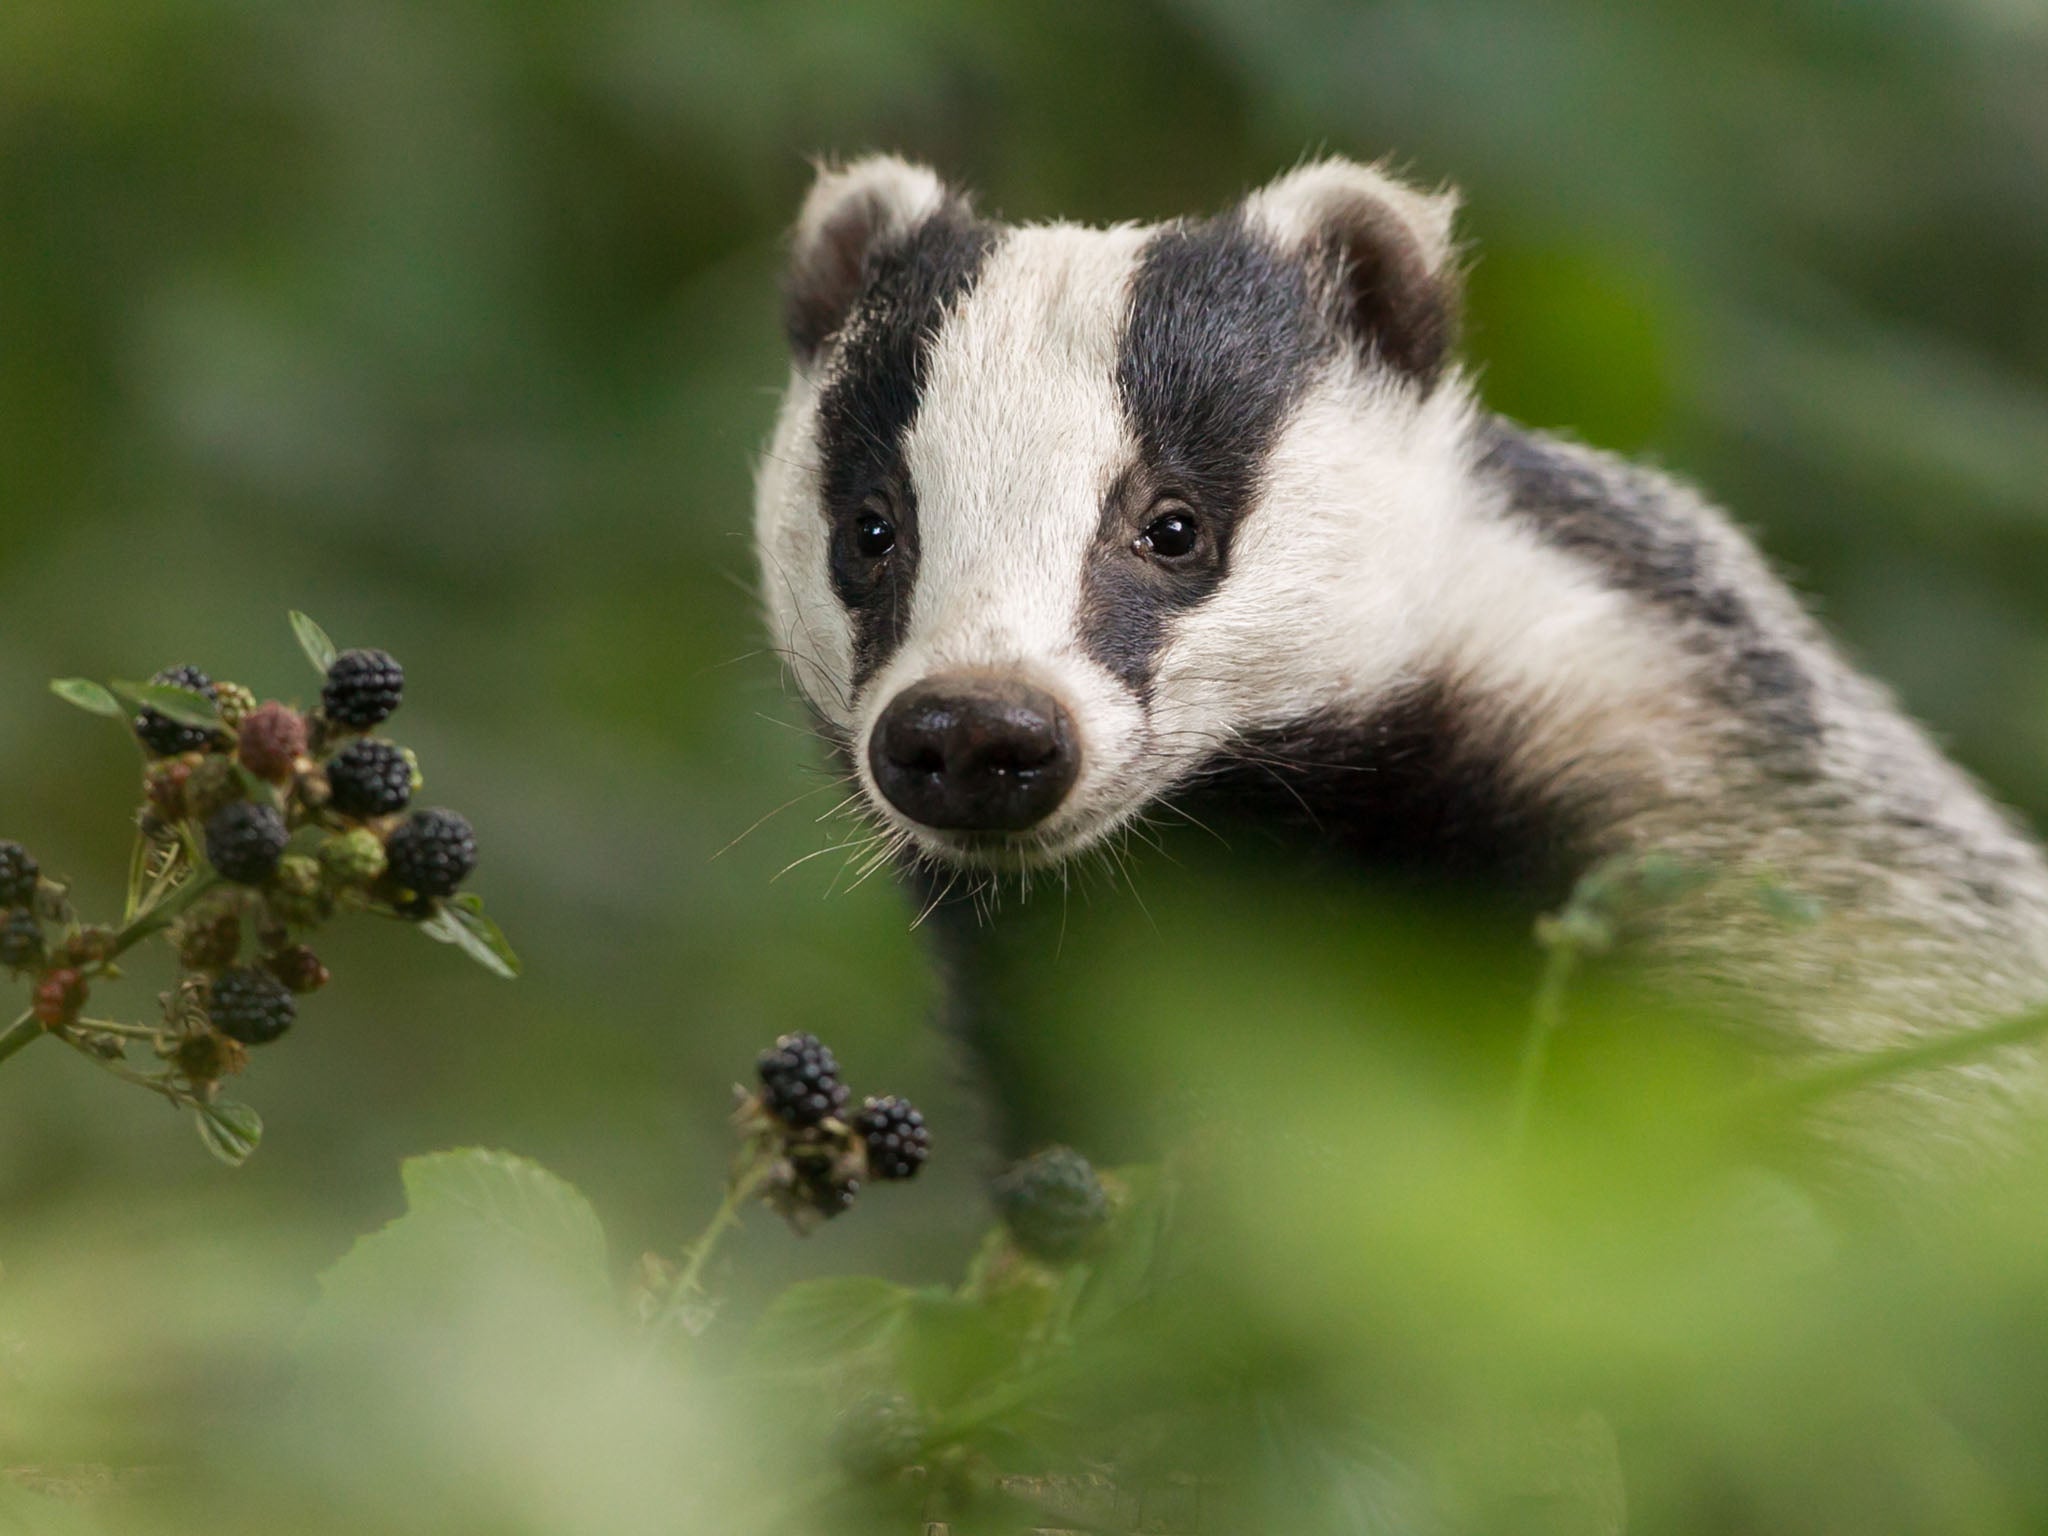 Culling may not be the best option to prevent the spread of disease from badgers to cows